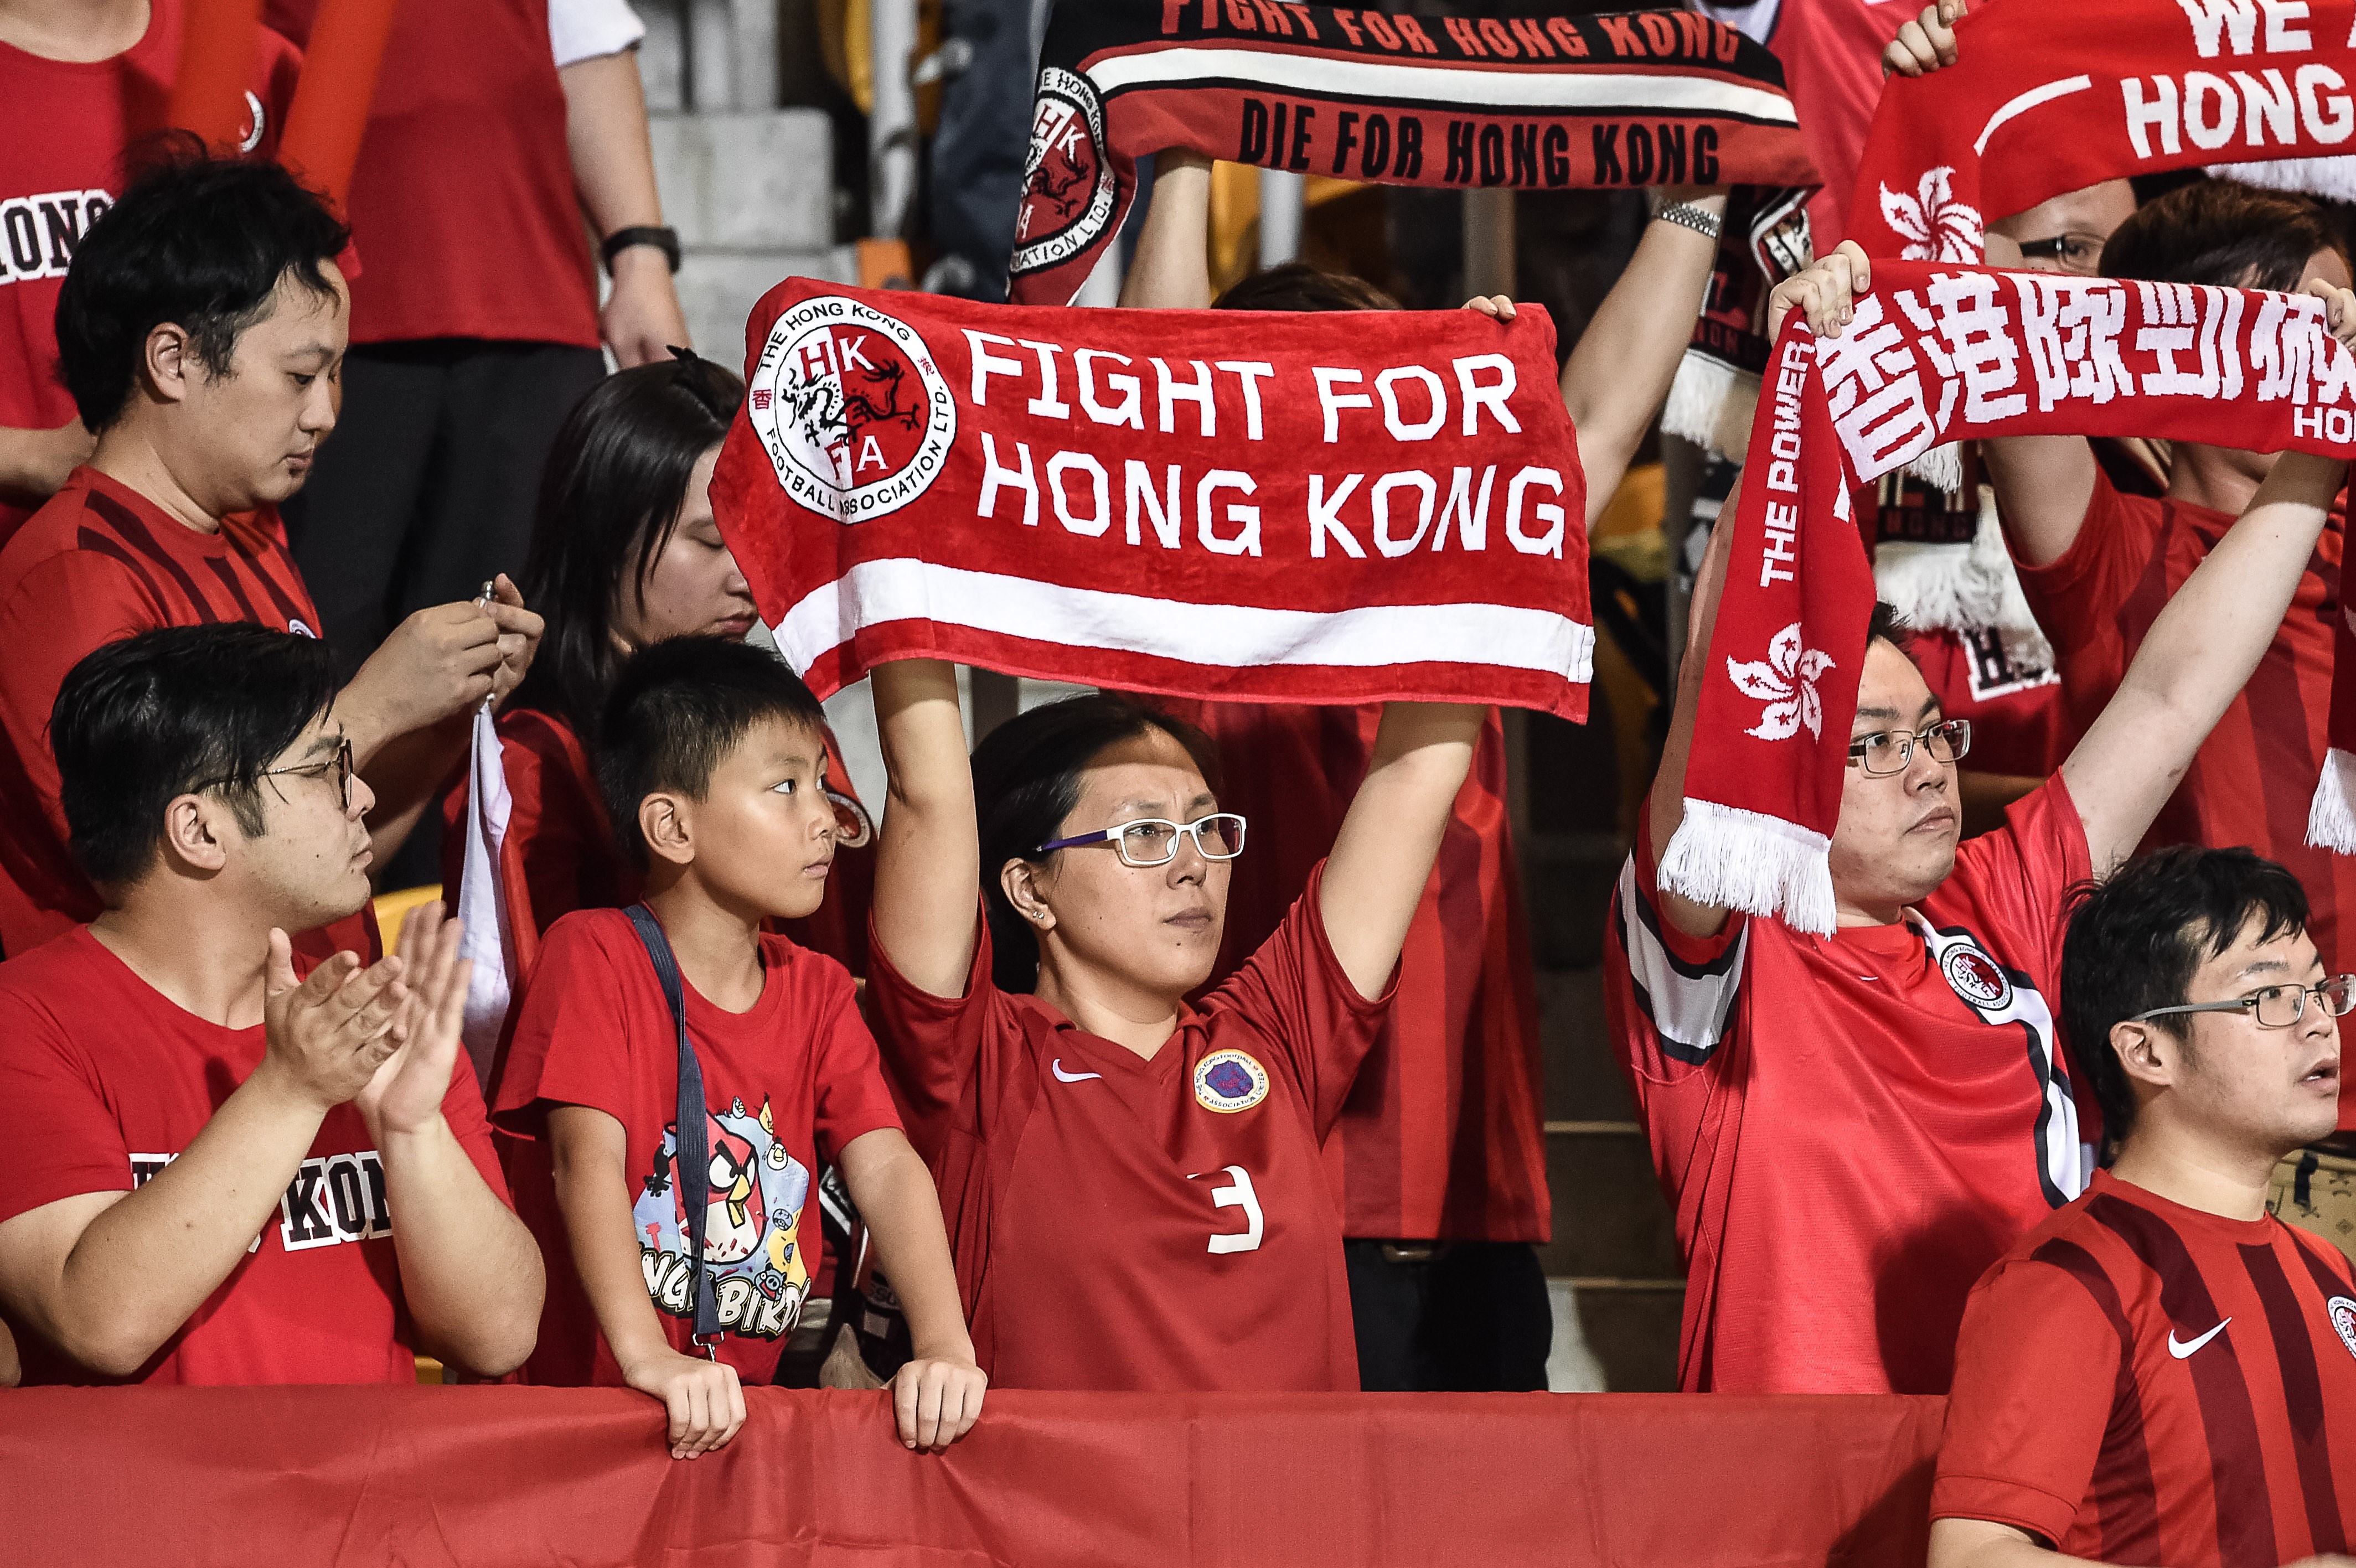 Hong Kong football fans during the 2018 World Cup football qualifying match between Hong Kong and Qatar in Hong Kong on Sept. 8, 2015. The Hong Kong Football Association said they would be "disappointed" if FIFA punished them after fans jeered the Chinese national anthem before they game (Philippe Lopez—AFP/Getty Images)